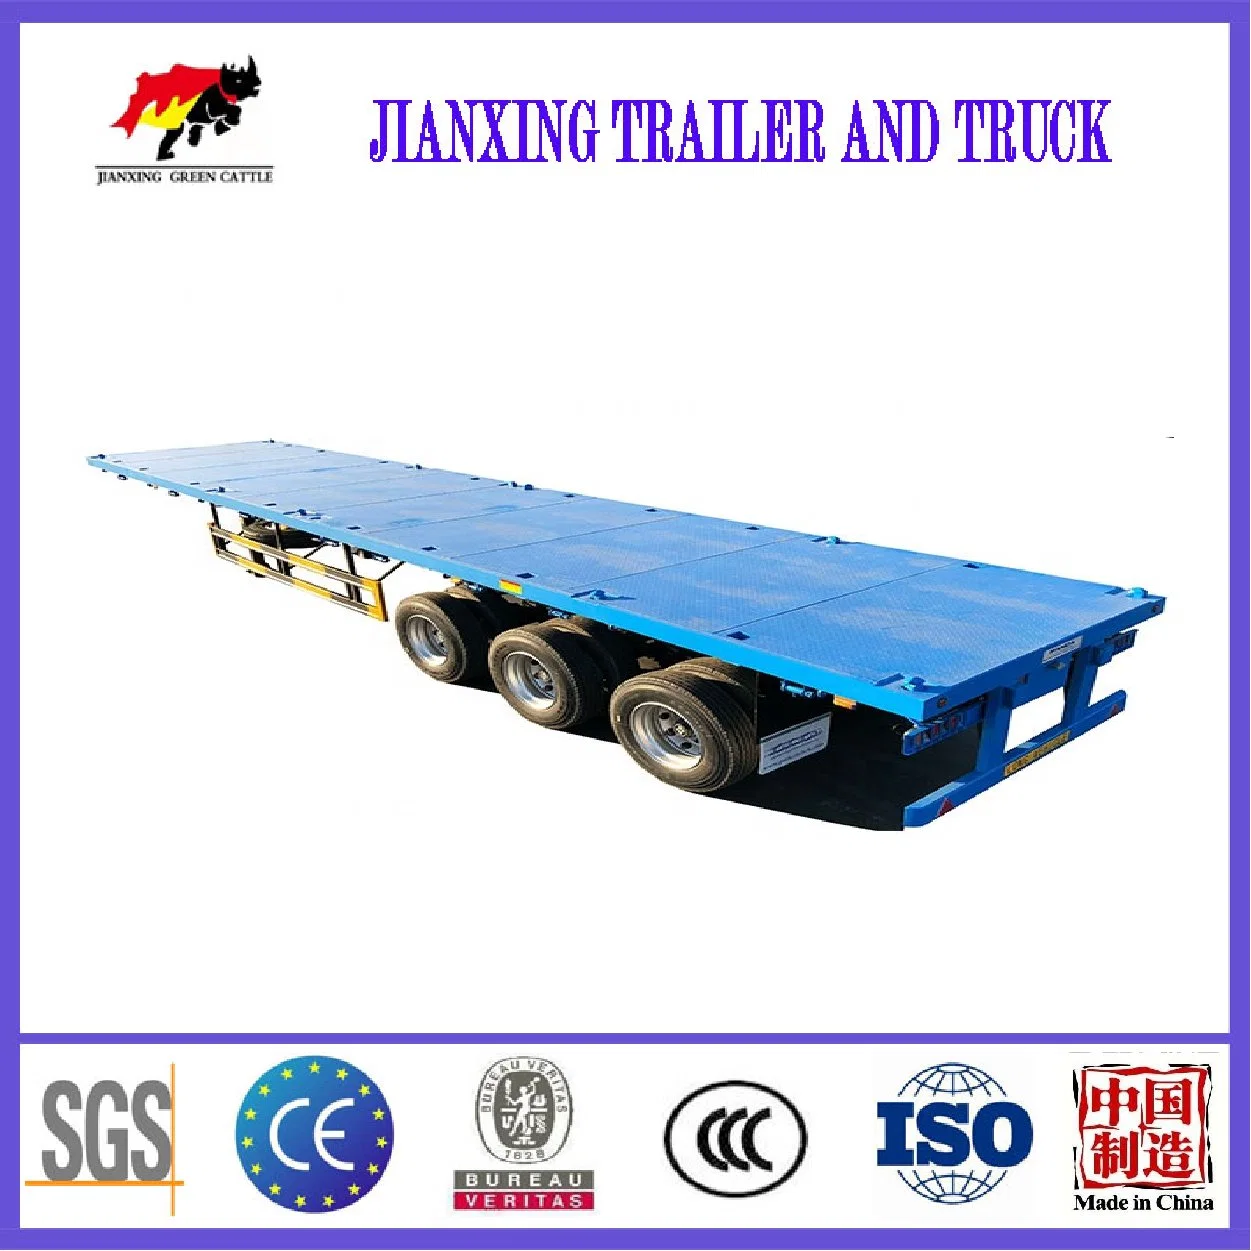 Jianxing Good Product Used Shipping Container 20FT 40FT Flatbed Semi Trailer 3 Axle Flat Bed Truck Trailer with Container Lock for Sale